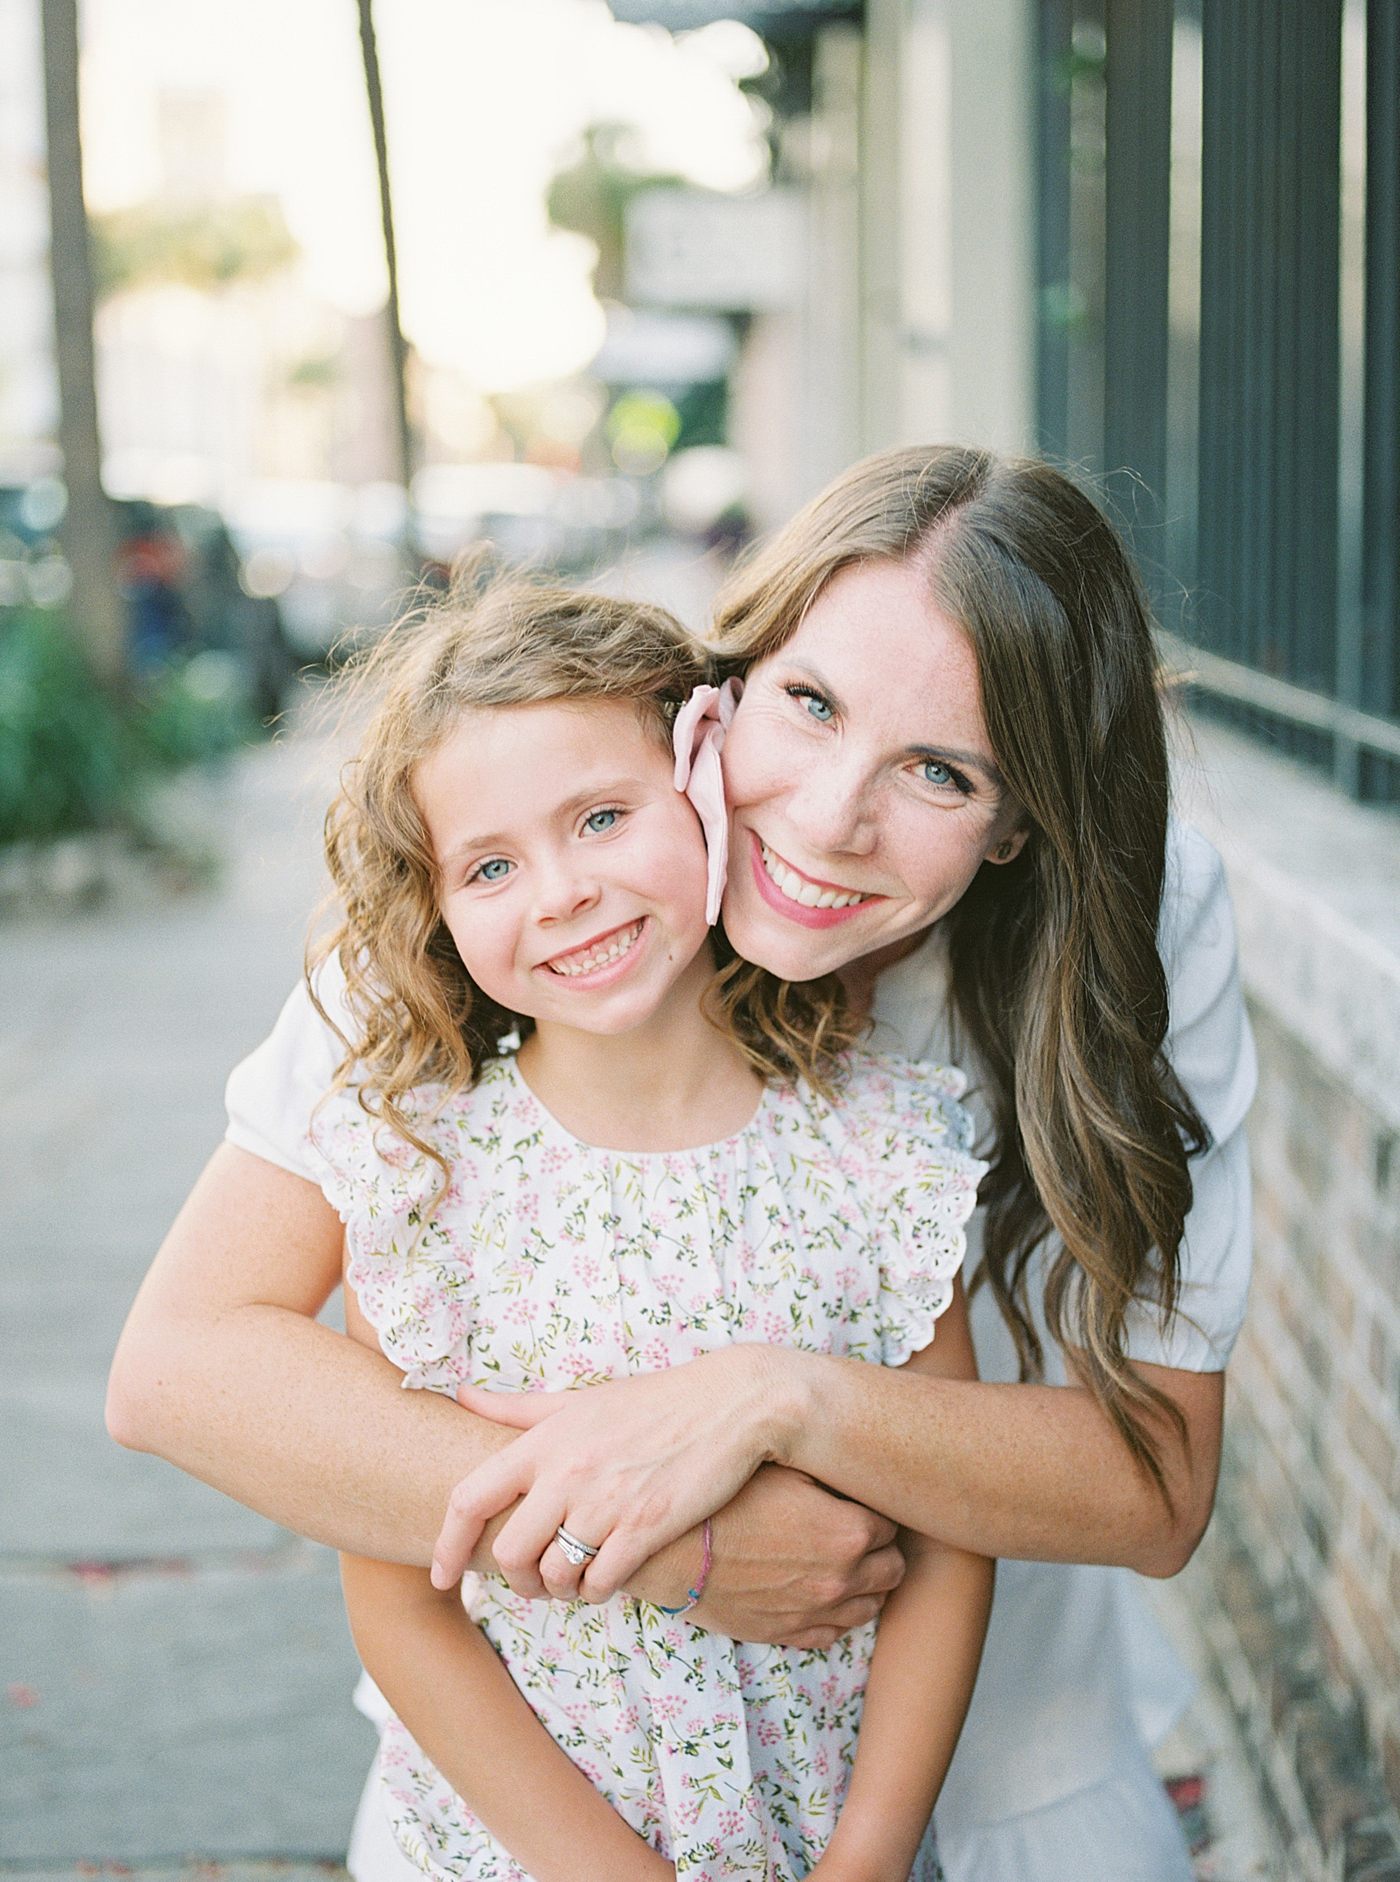 Mom snuggling with her little girl during family photos | Photos by Family Photographer in Downtown Charleston